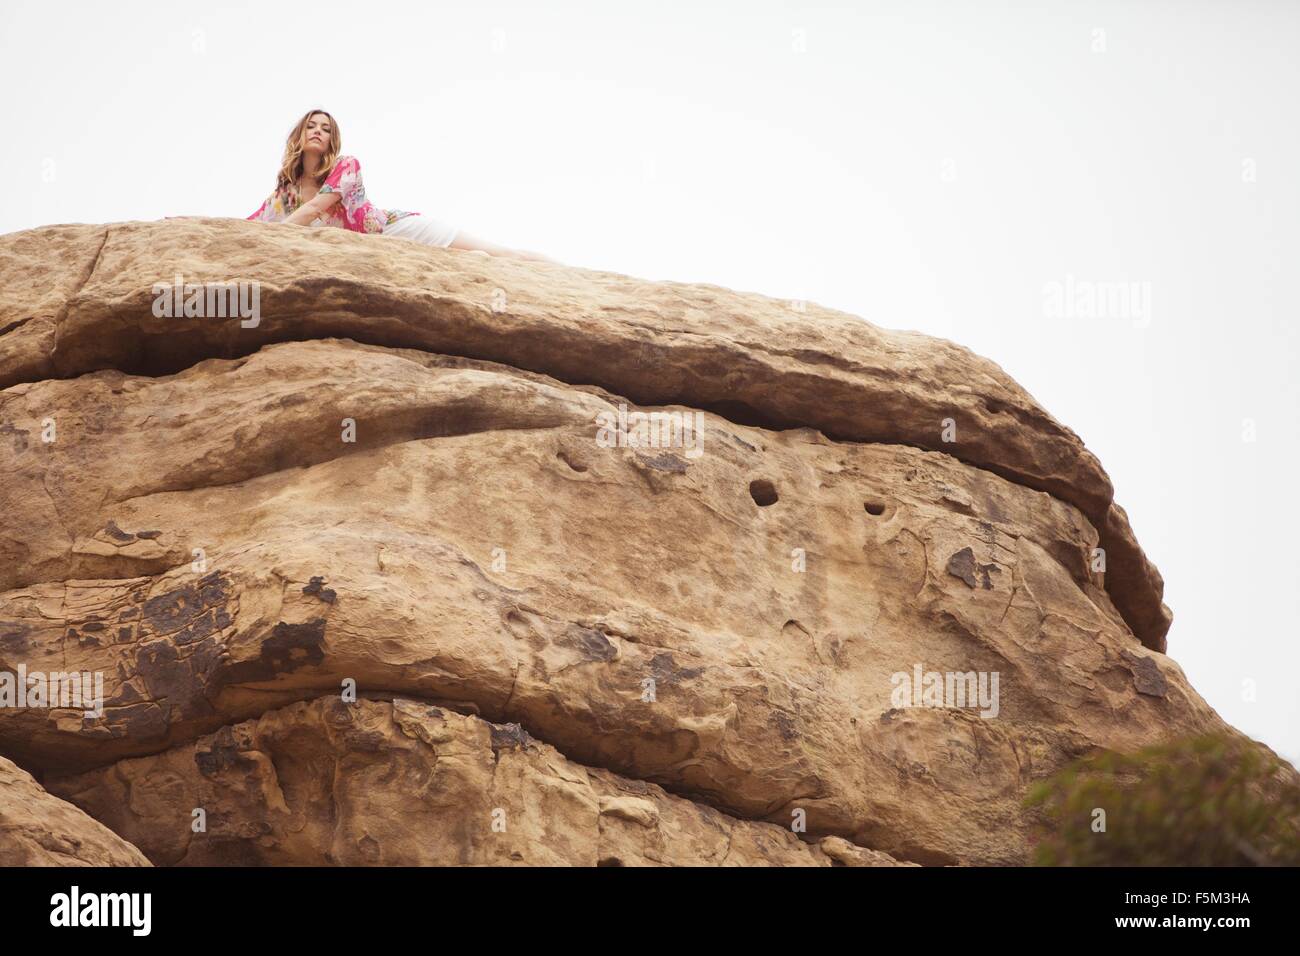 Woman relaxing on rock formation, Stoney Point, Topanga Canyon, Chatsworth, Los Angeles, Californie, USA Banque D'Images